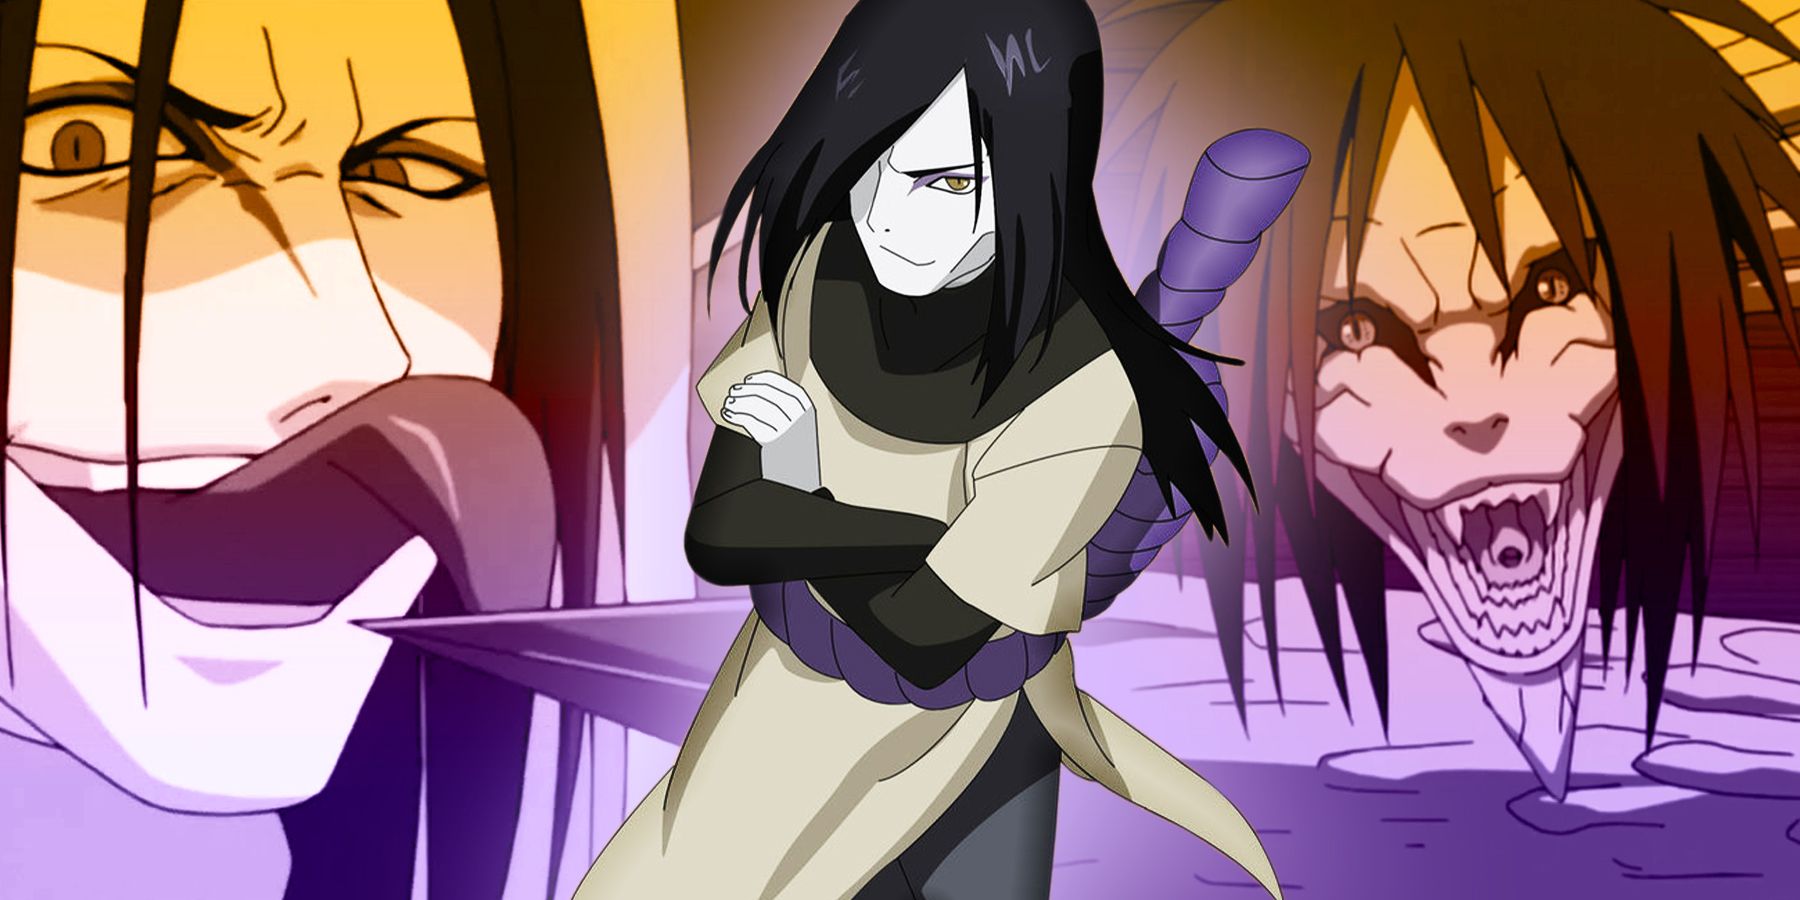 Orochimaru Anime by Adam Khabibi on canvas, poster, wallpaper and more